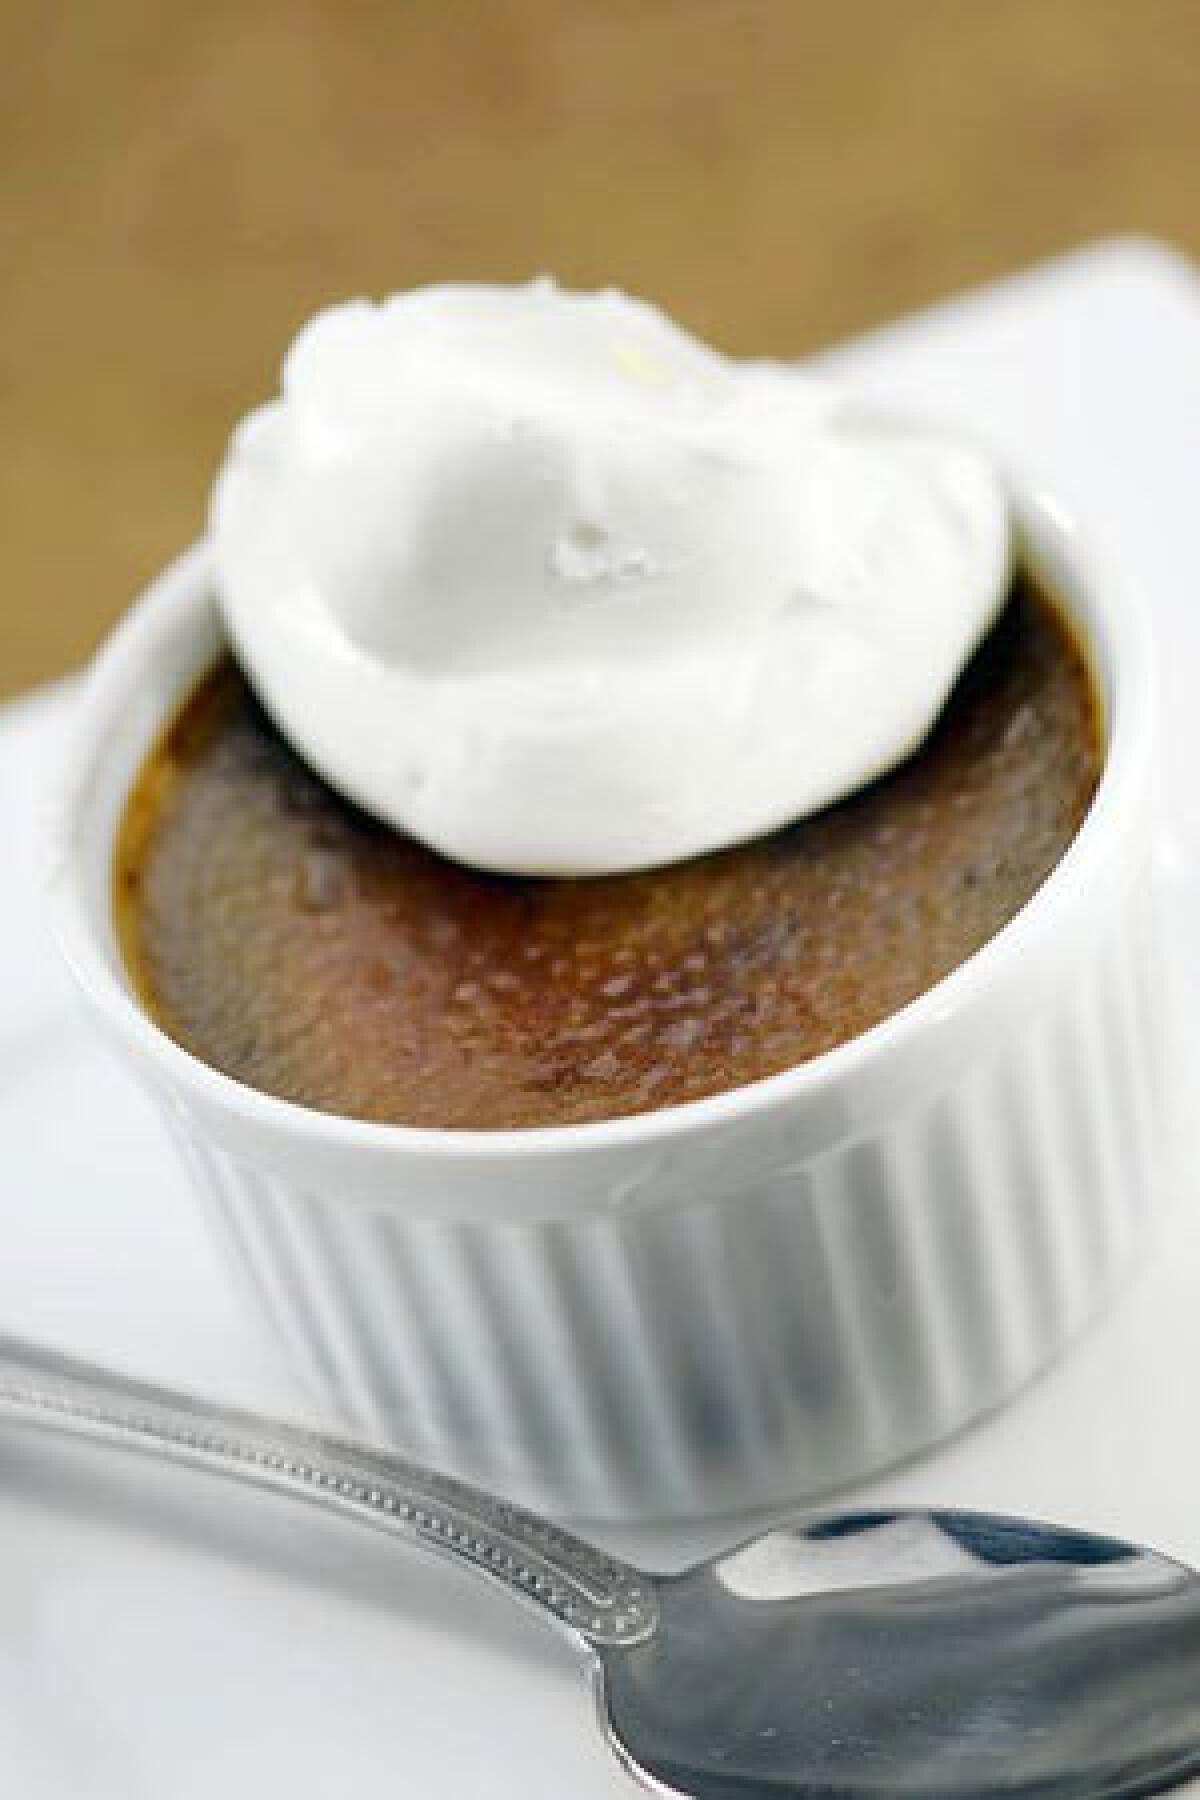 Creme brulee can be more than just a dessert, "Edible Stories" author Mark Kurlansky knows.